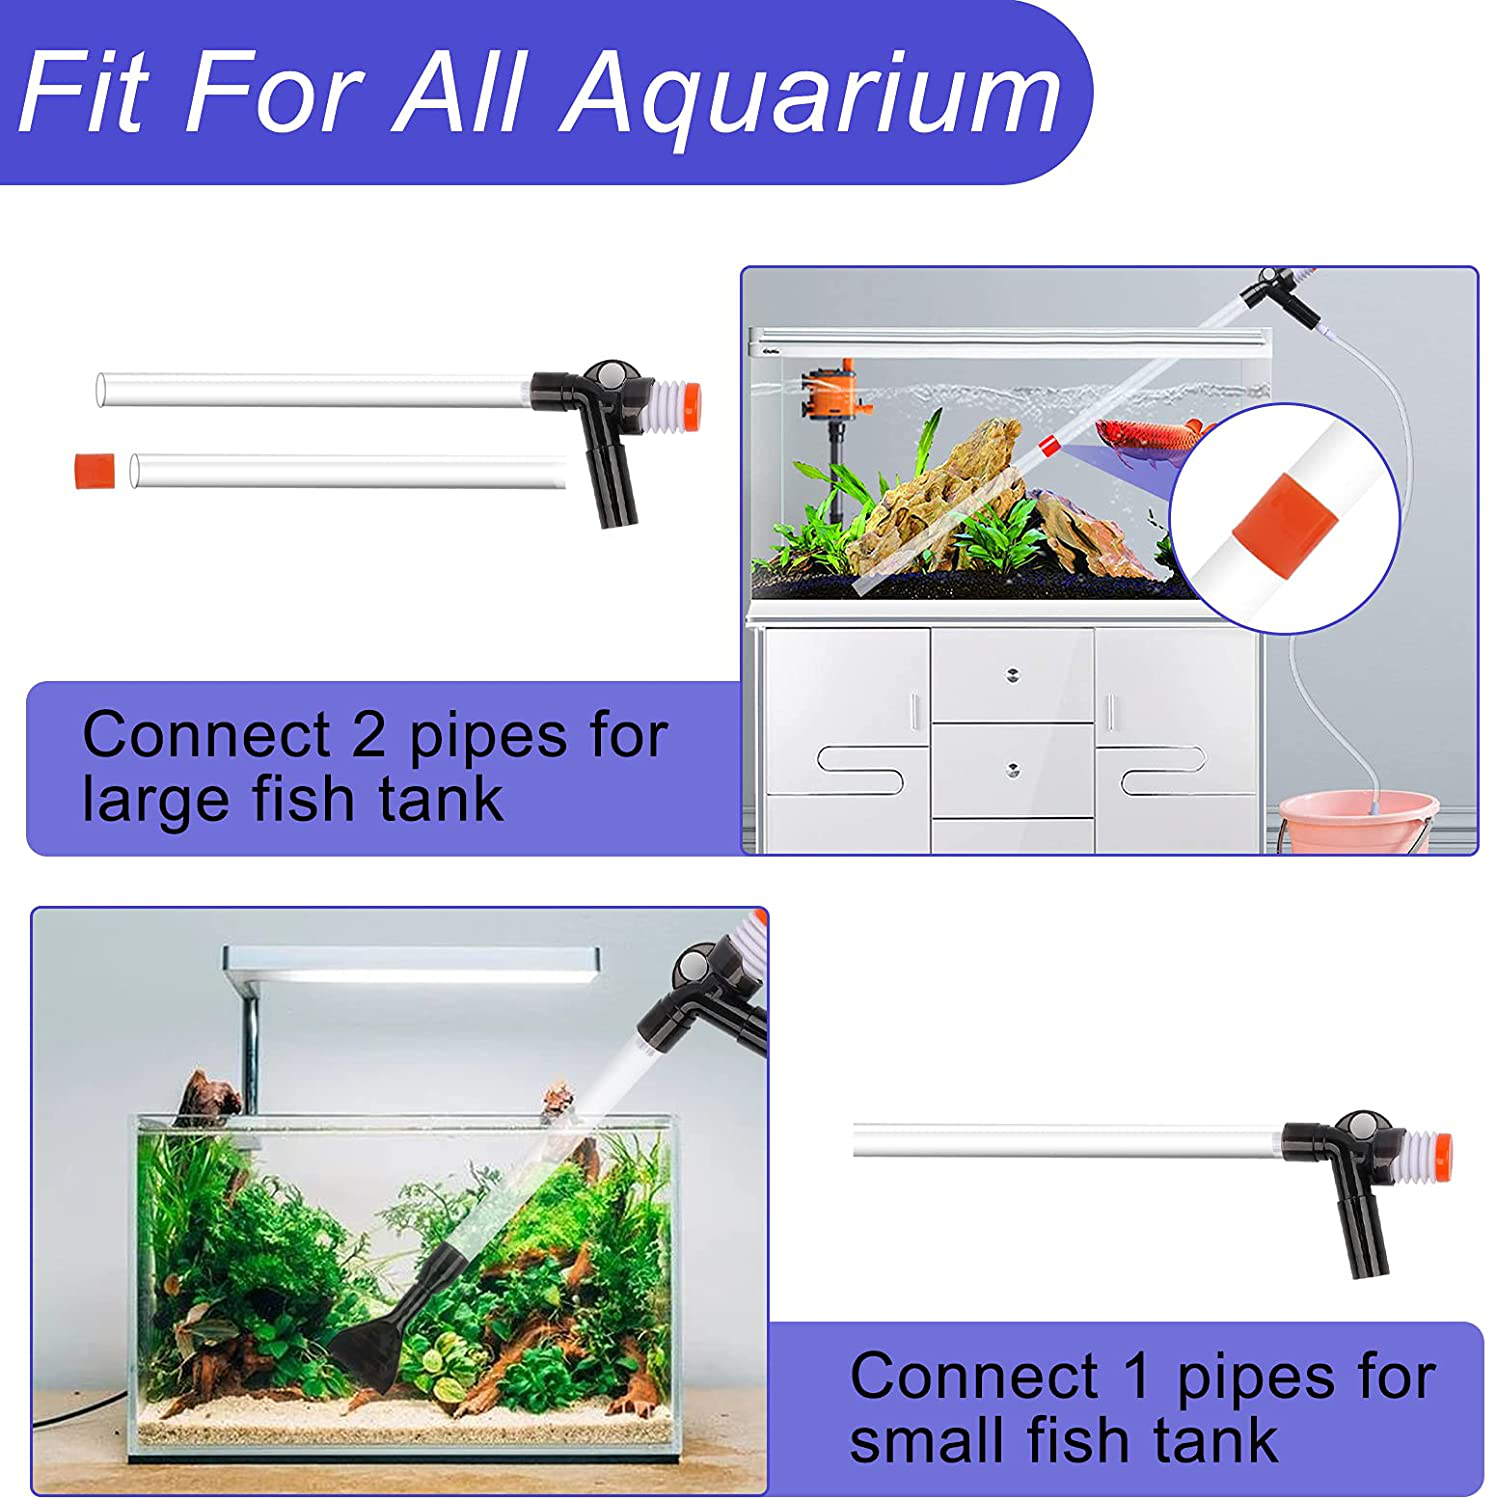 Hachtecpet Aquarium Gravel Vacuum Cleaner: Quick Fish Tank Siphon Cleaning with Algae Scrapers Air-Pressing Button Water Changer Kit for Water Changing | Sand Cleaner